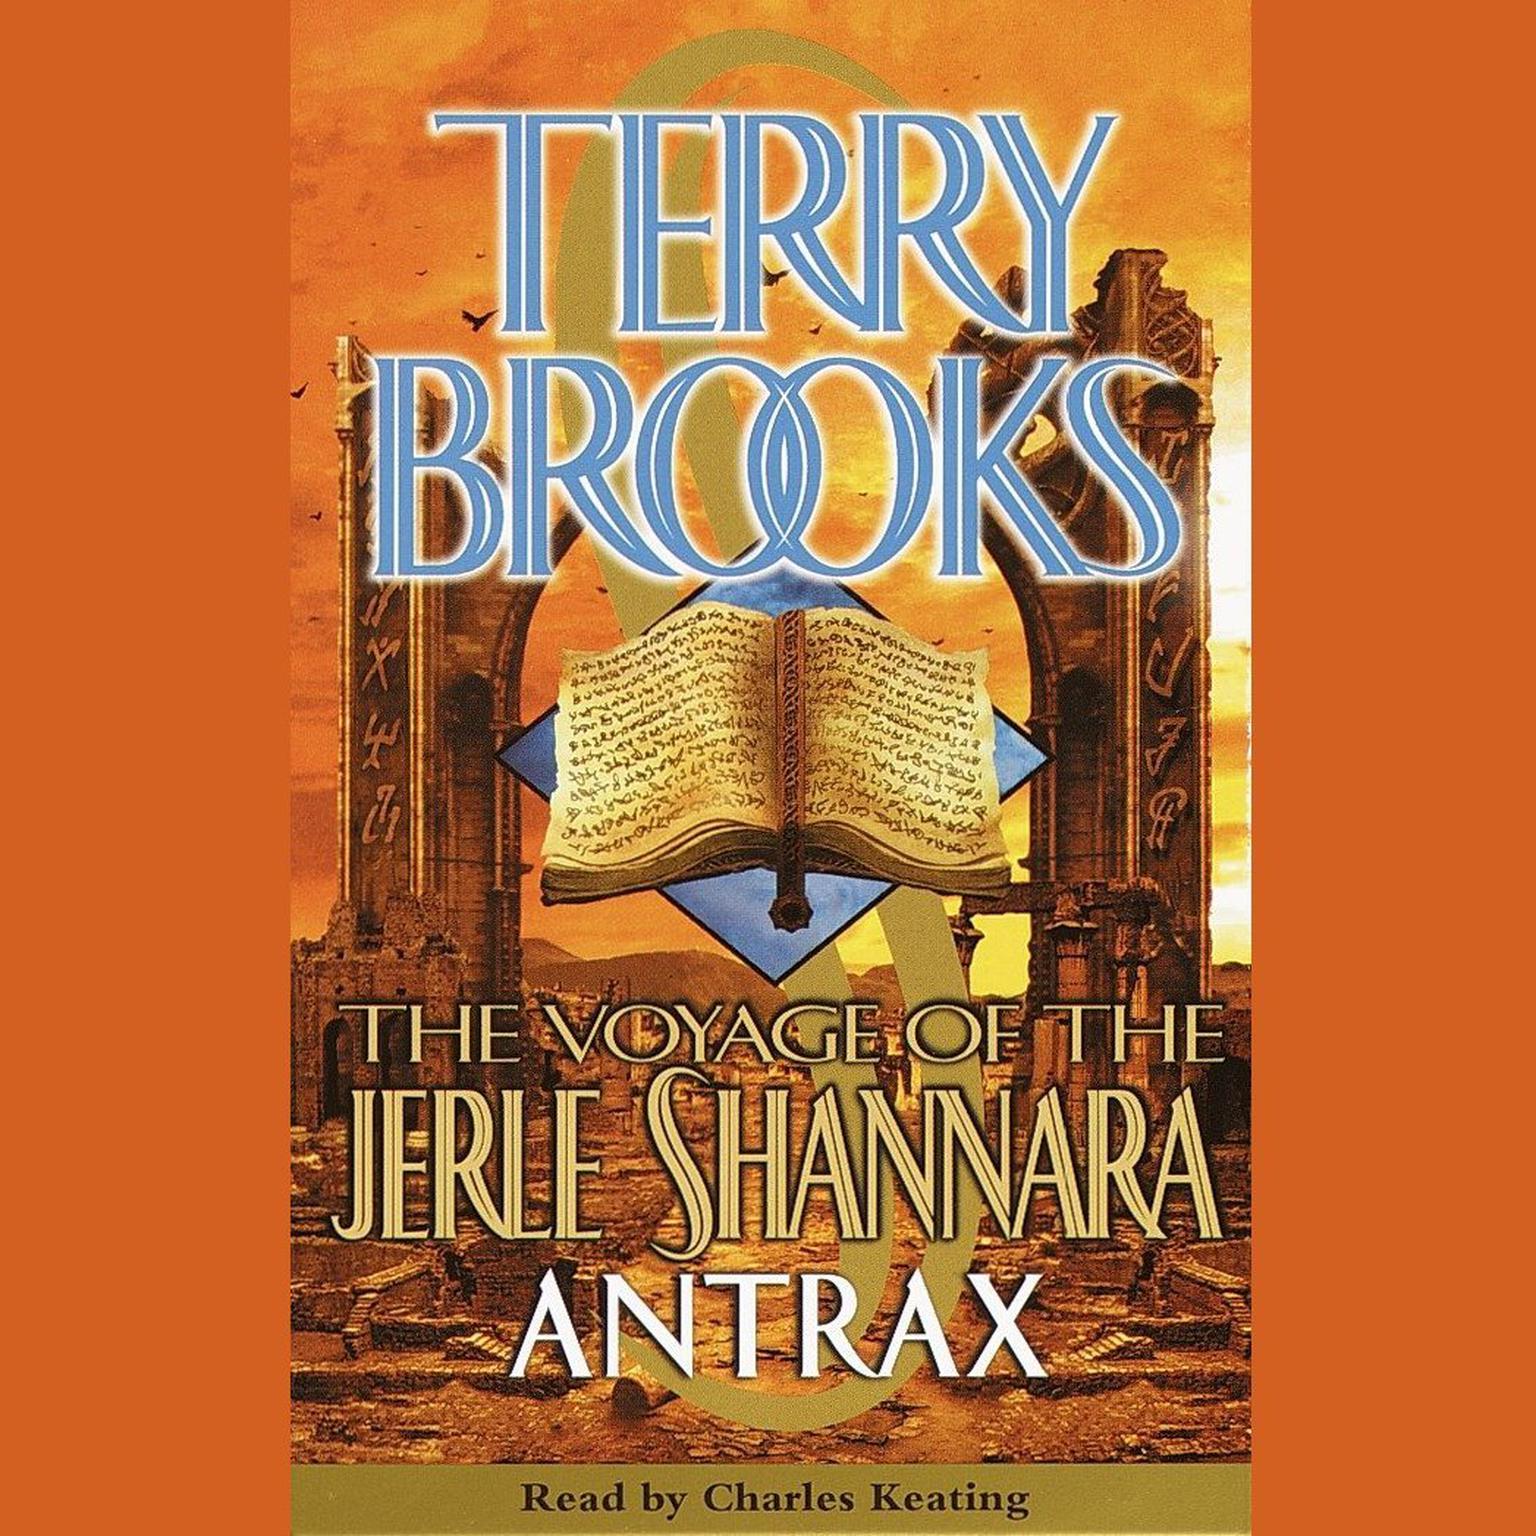 The Voyage of the Jerle Shannara: Antrax (Abridged) Audiobook, by Terry Brooks